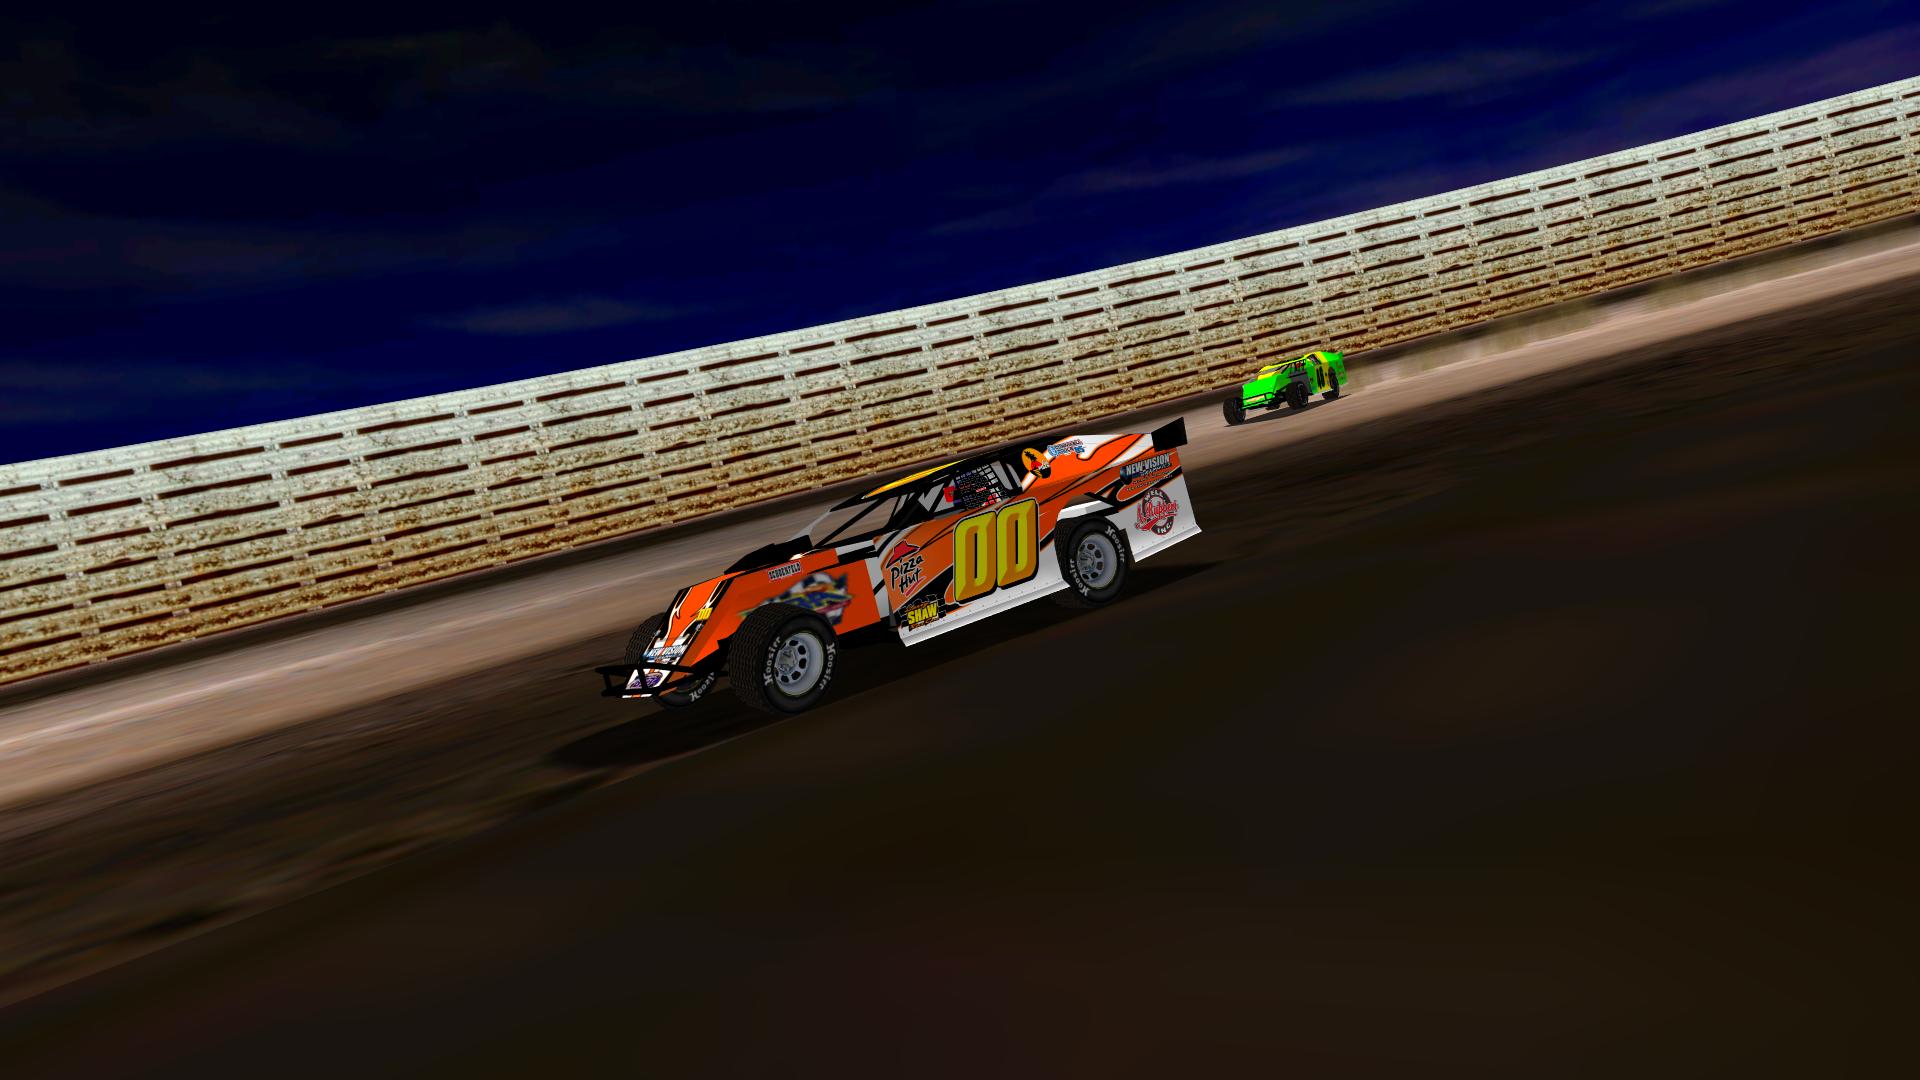 Sliding through turn four at Knoxville. (Credit: KartRacer63)